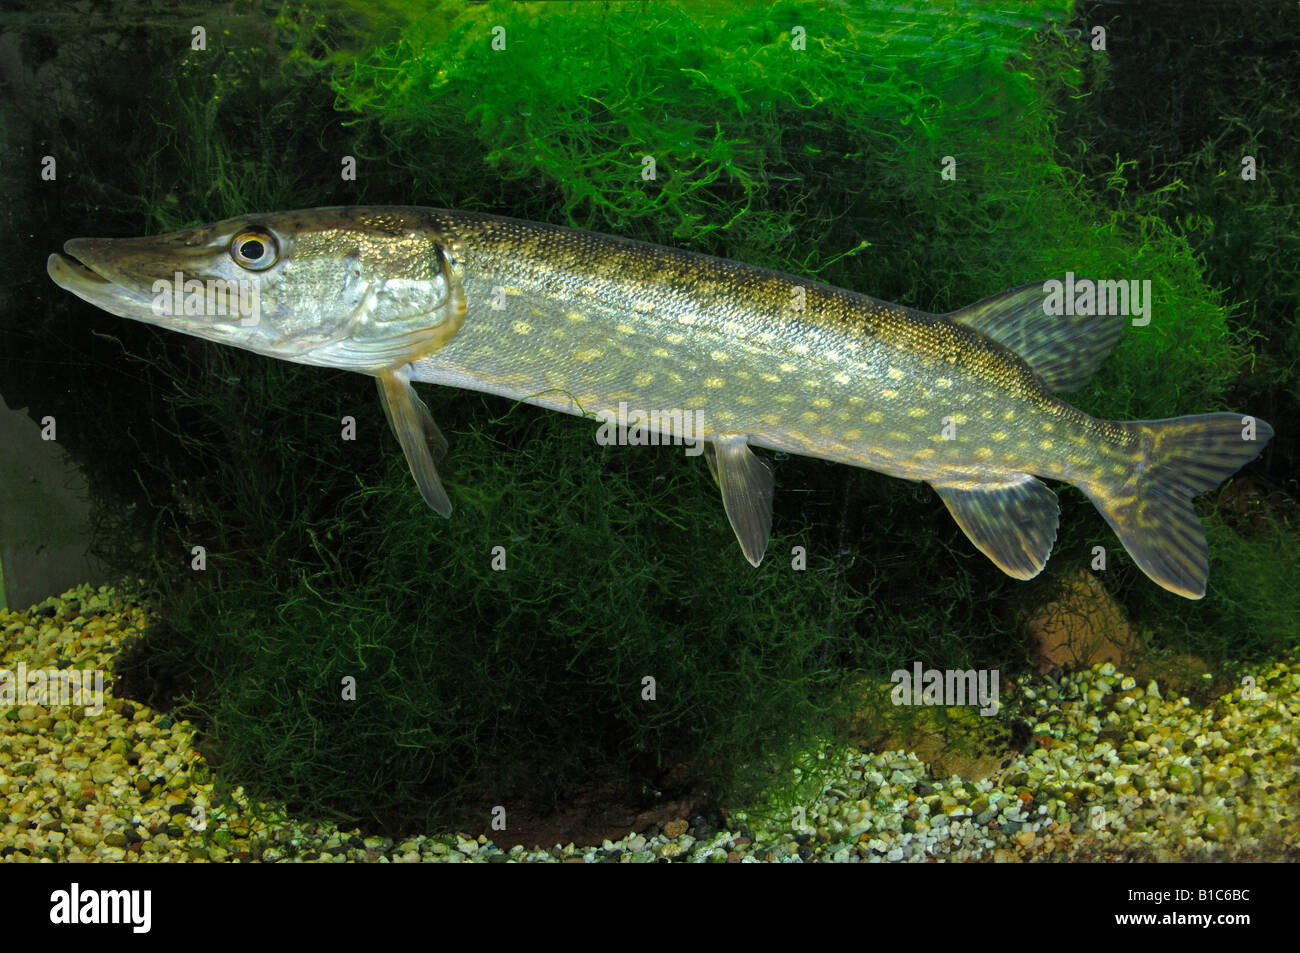 Pike, Northern Pike (Esox lucius) in front of aquatic plants Stock Photo